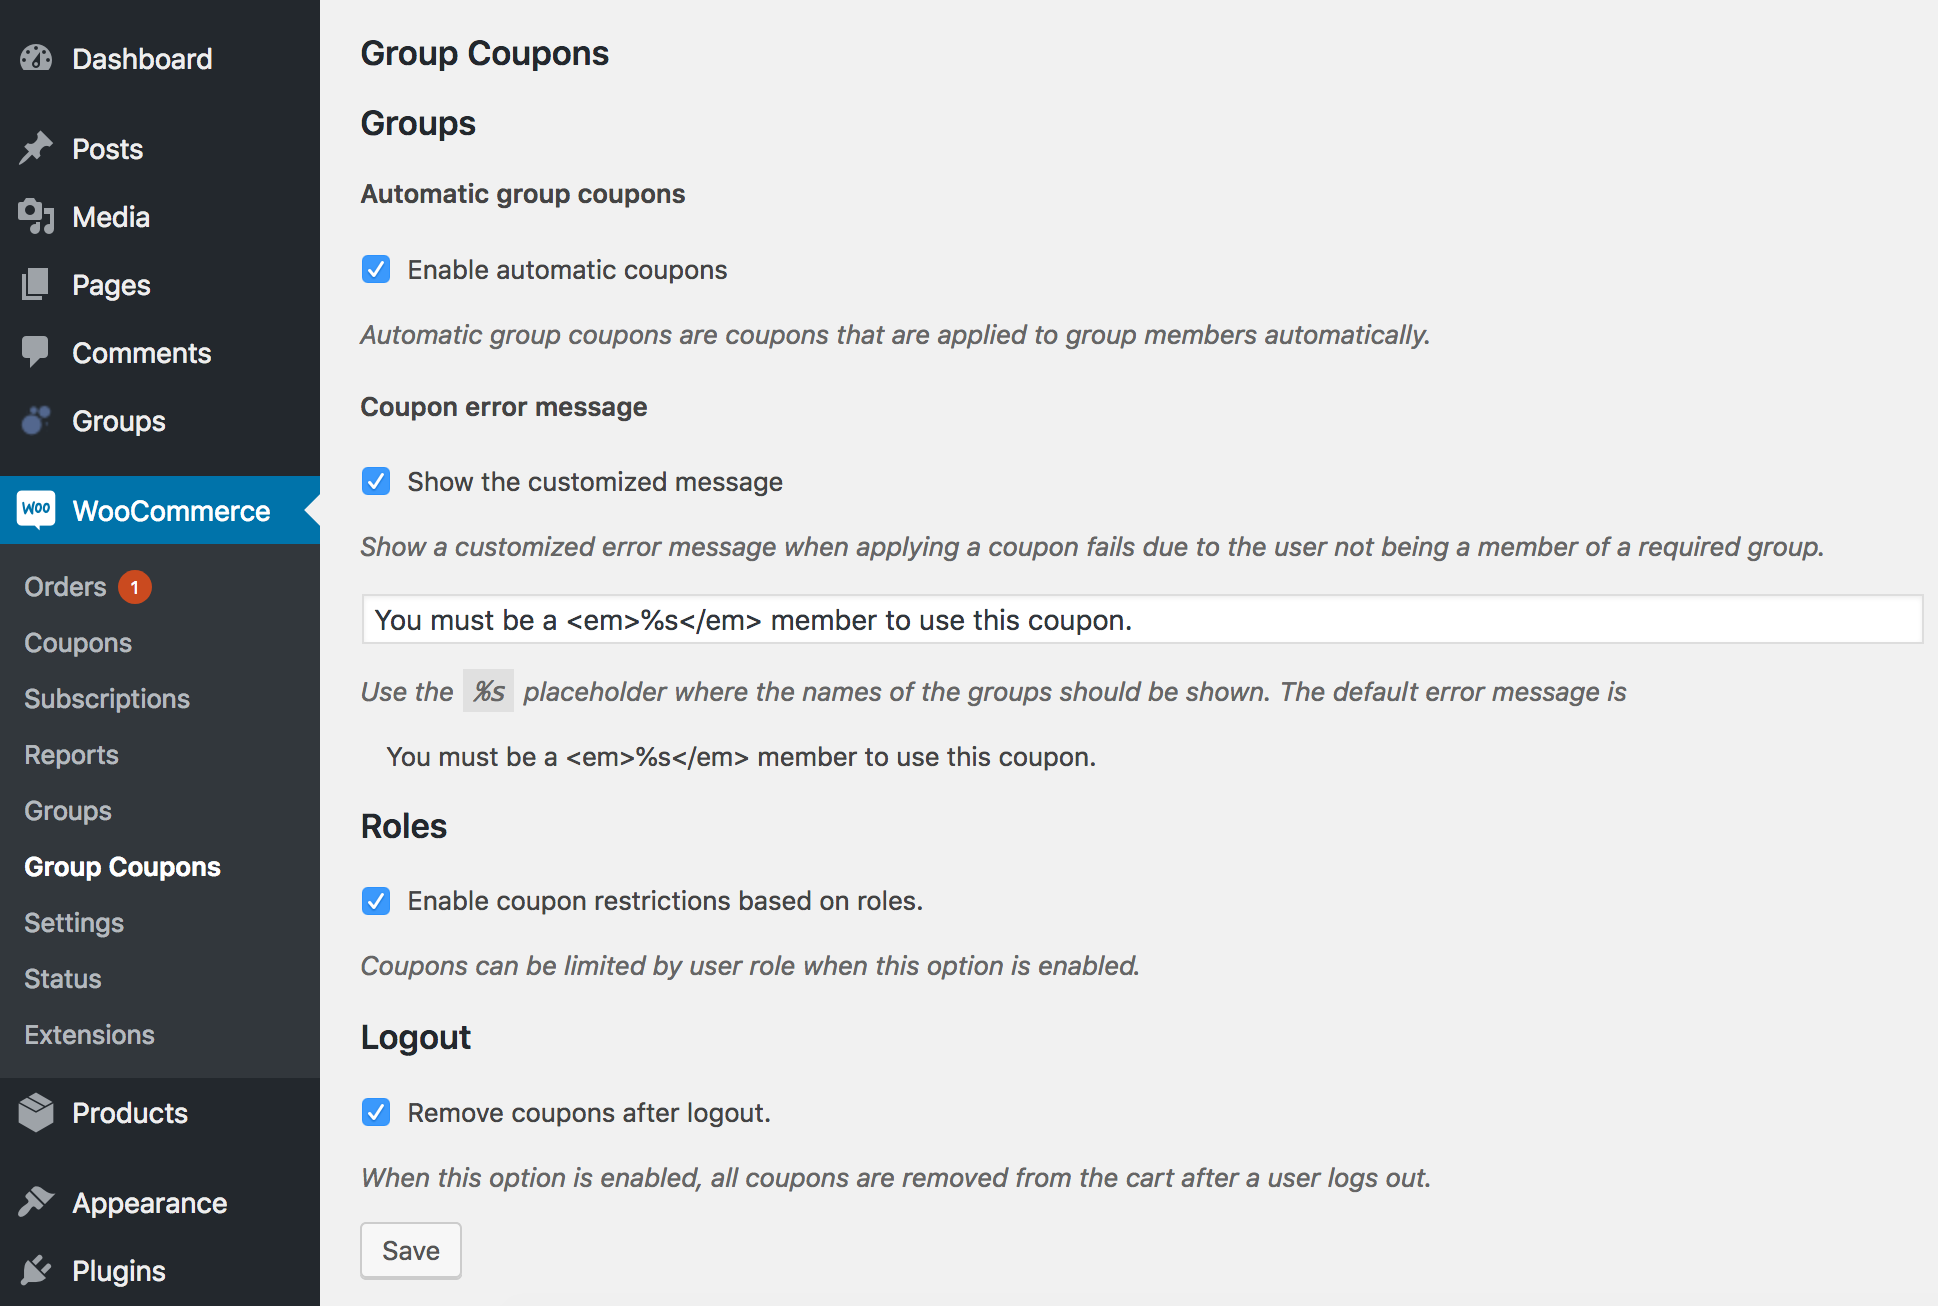 Showing the settings screen of the WooCommerce Group Coupons extension